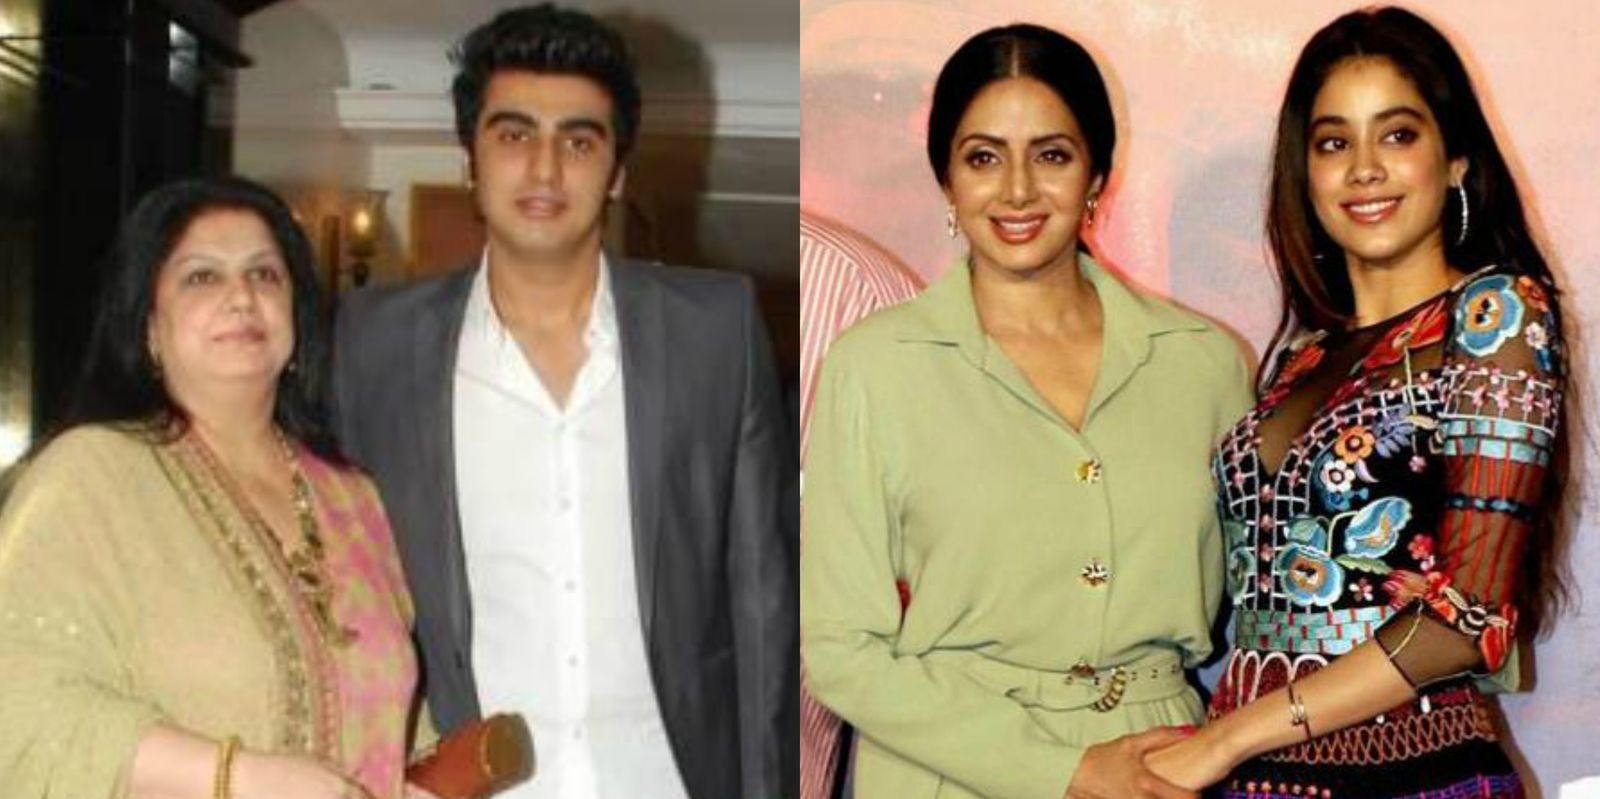 A Shocking Coincidence! Arjun Kapoor Lost His Mother Just A Few Months Before His Debut As Jhanvi kapoor Did!